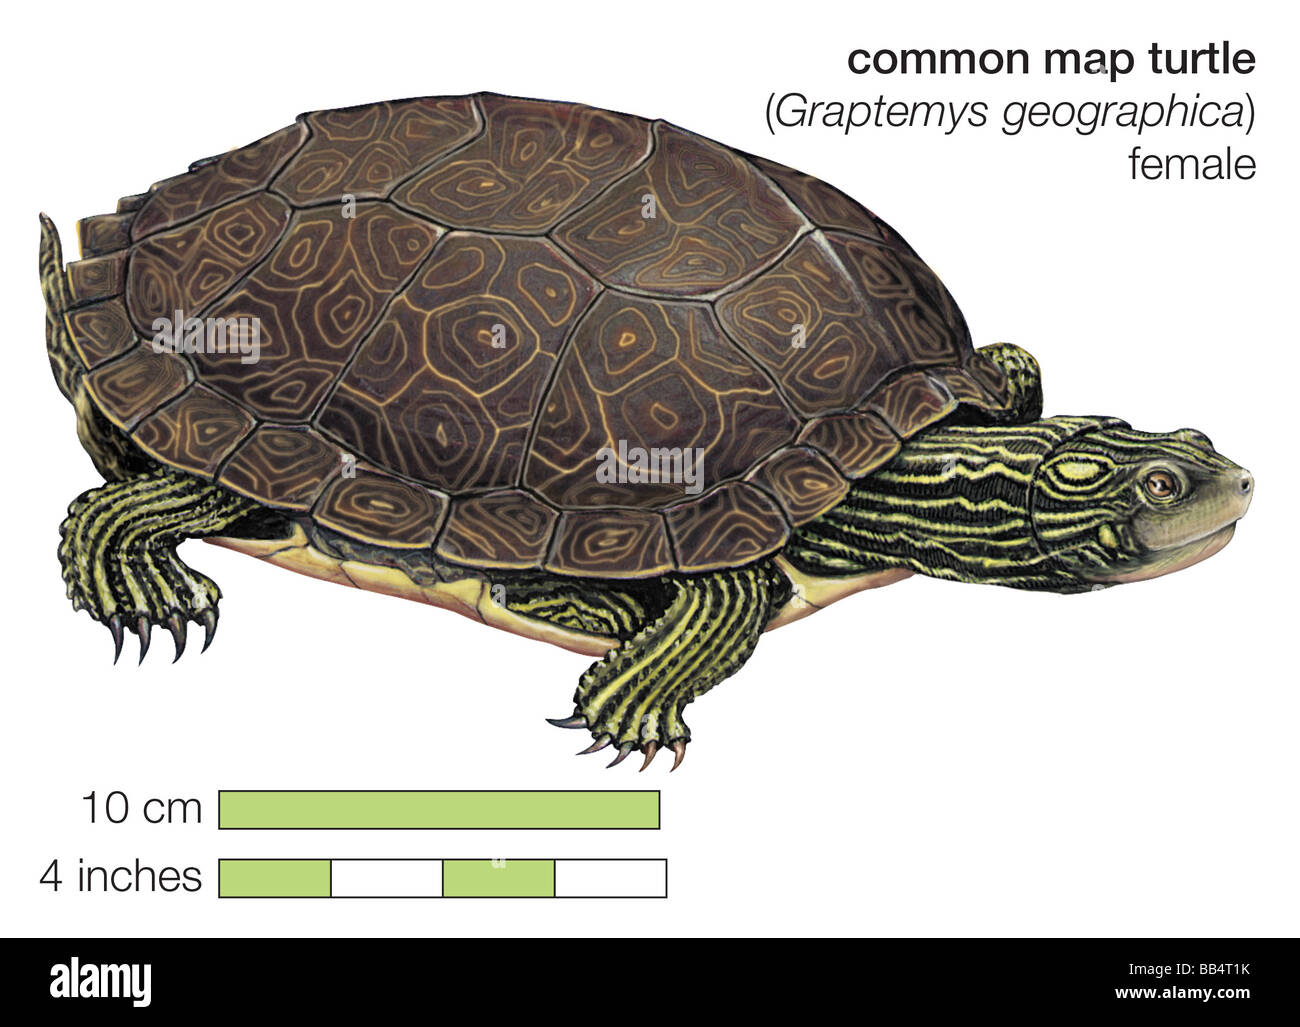 Female common map turtle (Graptemys geographica) Stock Photo